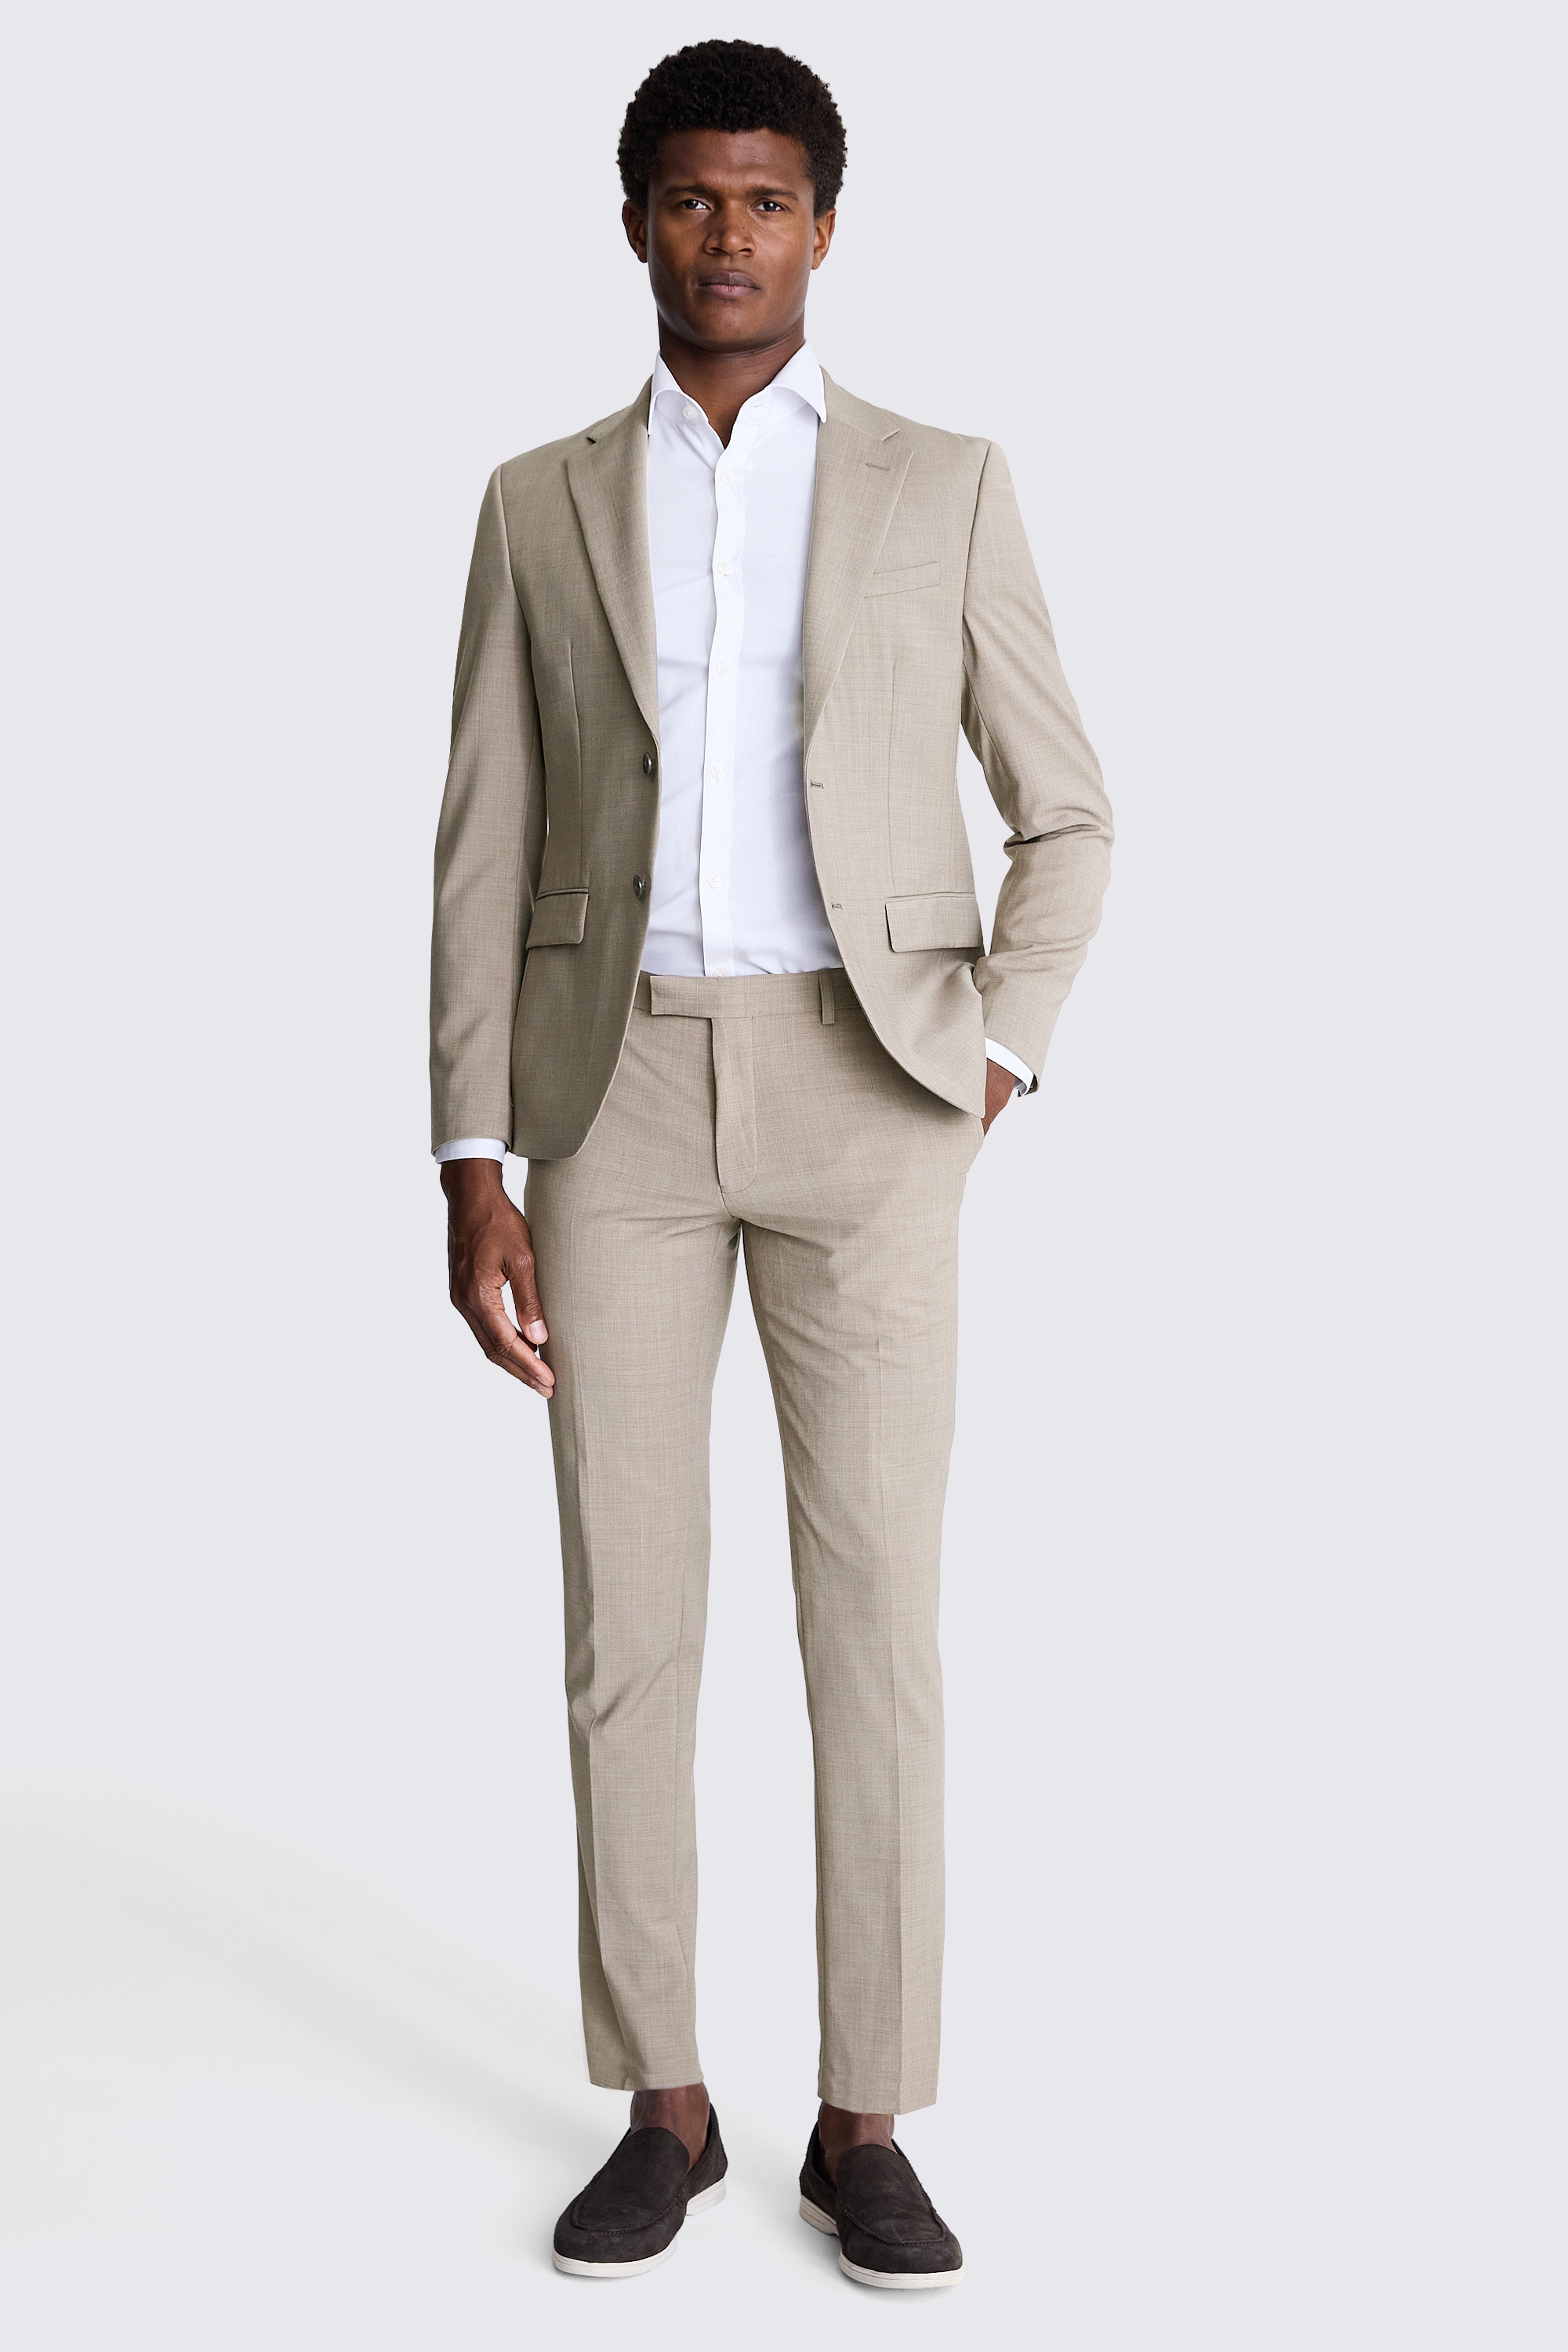 DKNY Slim Fit Taupe Jacket | Buy Online at Moss